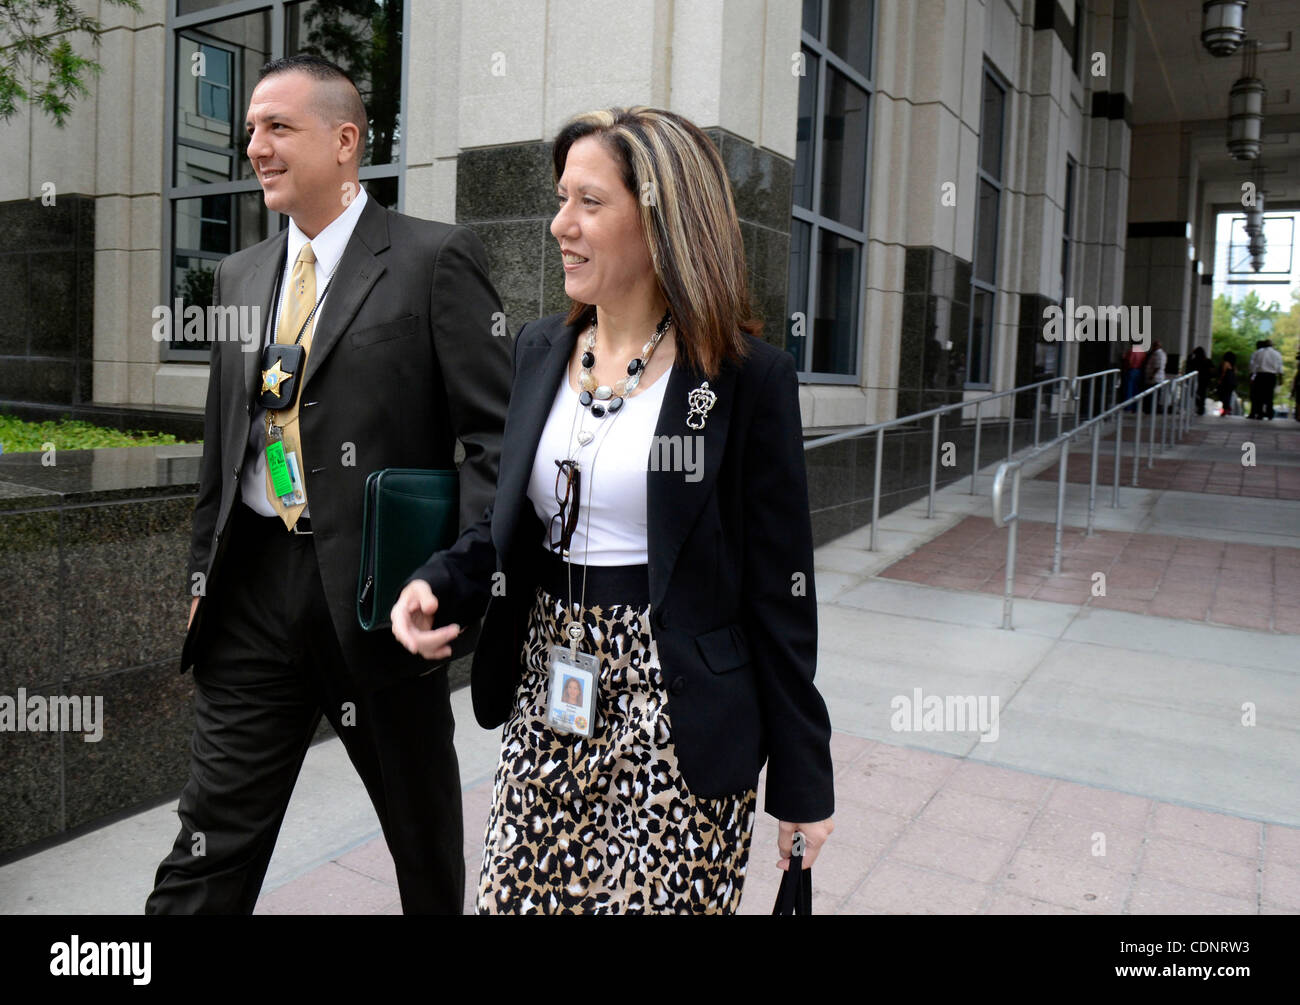 June 27, 2011 - Orlando, Florida, U.S. - Orange County homicide detective YURI MELICH, left, and legal assistant ARLEEN ZAYAS walk to the entrance of the Orange County Courthouse during the Casey Anthony murder trial. Casey Anthony is charged with killing her two-year-old daughter Caylee in 2008. (C Stock Photo